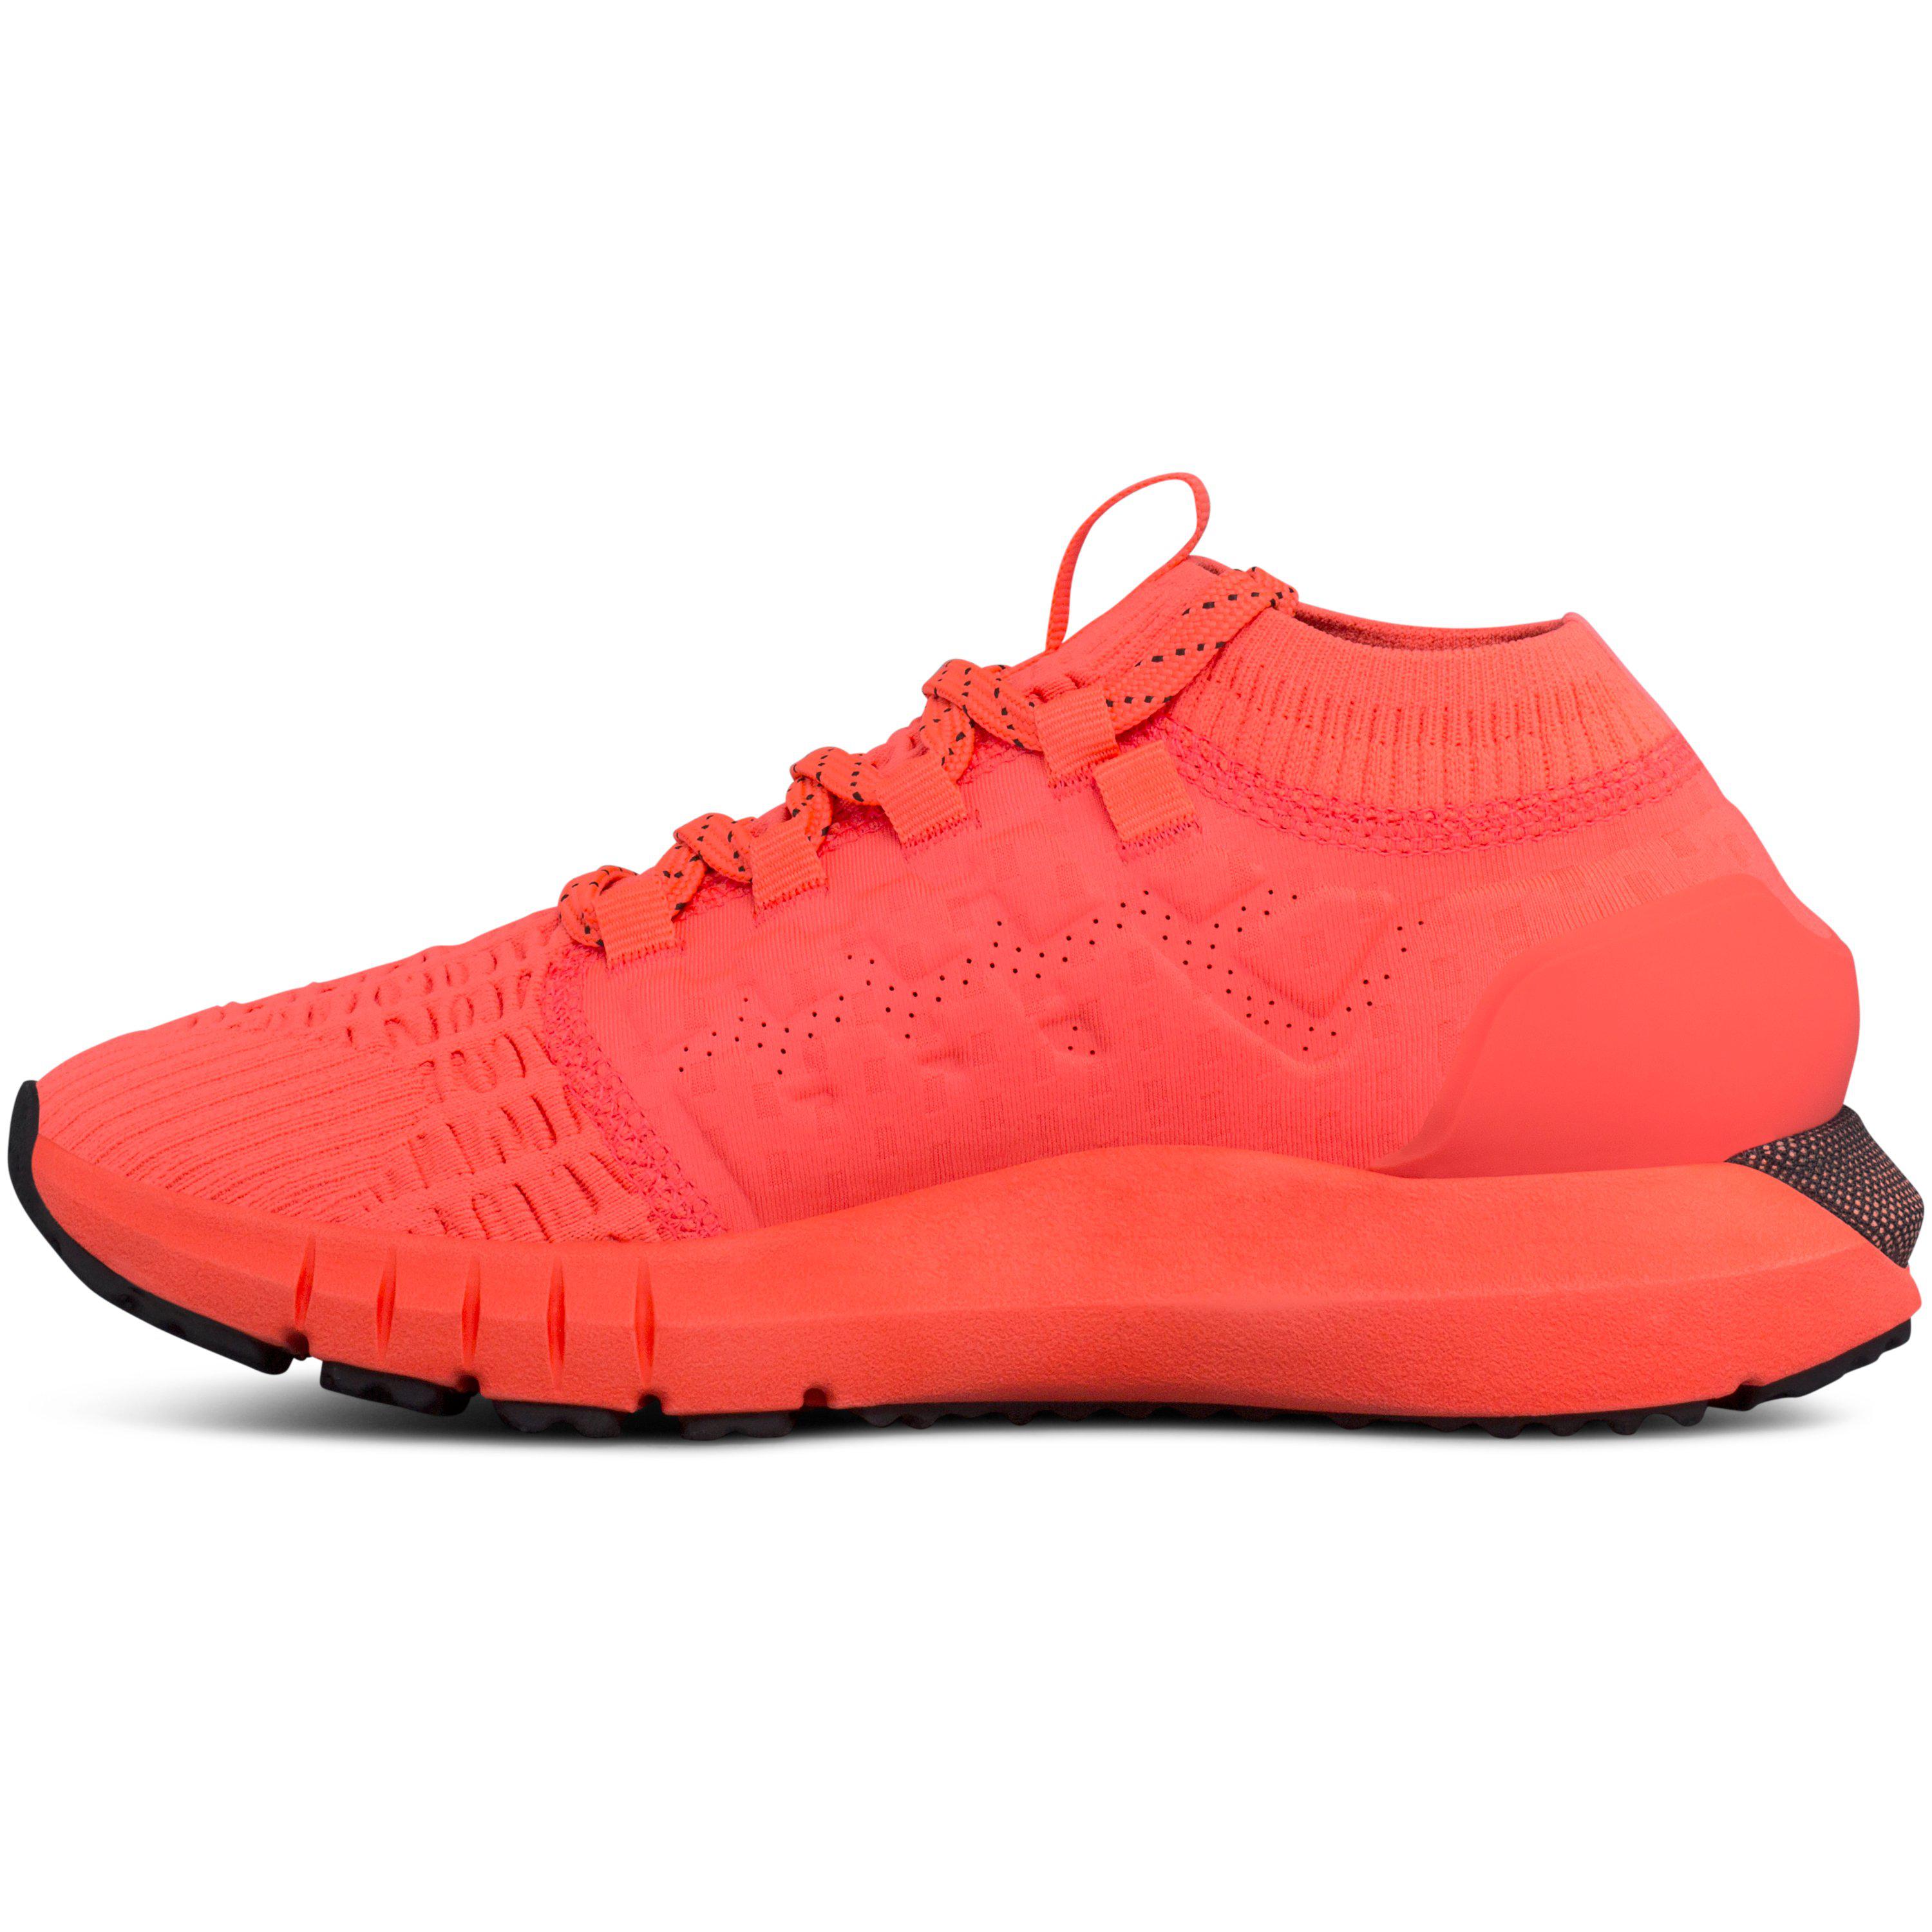 Under Armour Women's Ua Hovr Phantom Connected Running Shoes in Red | Lyst